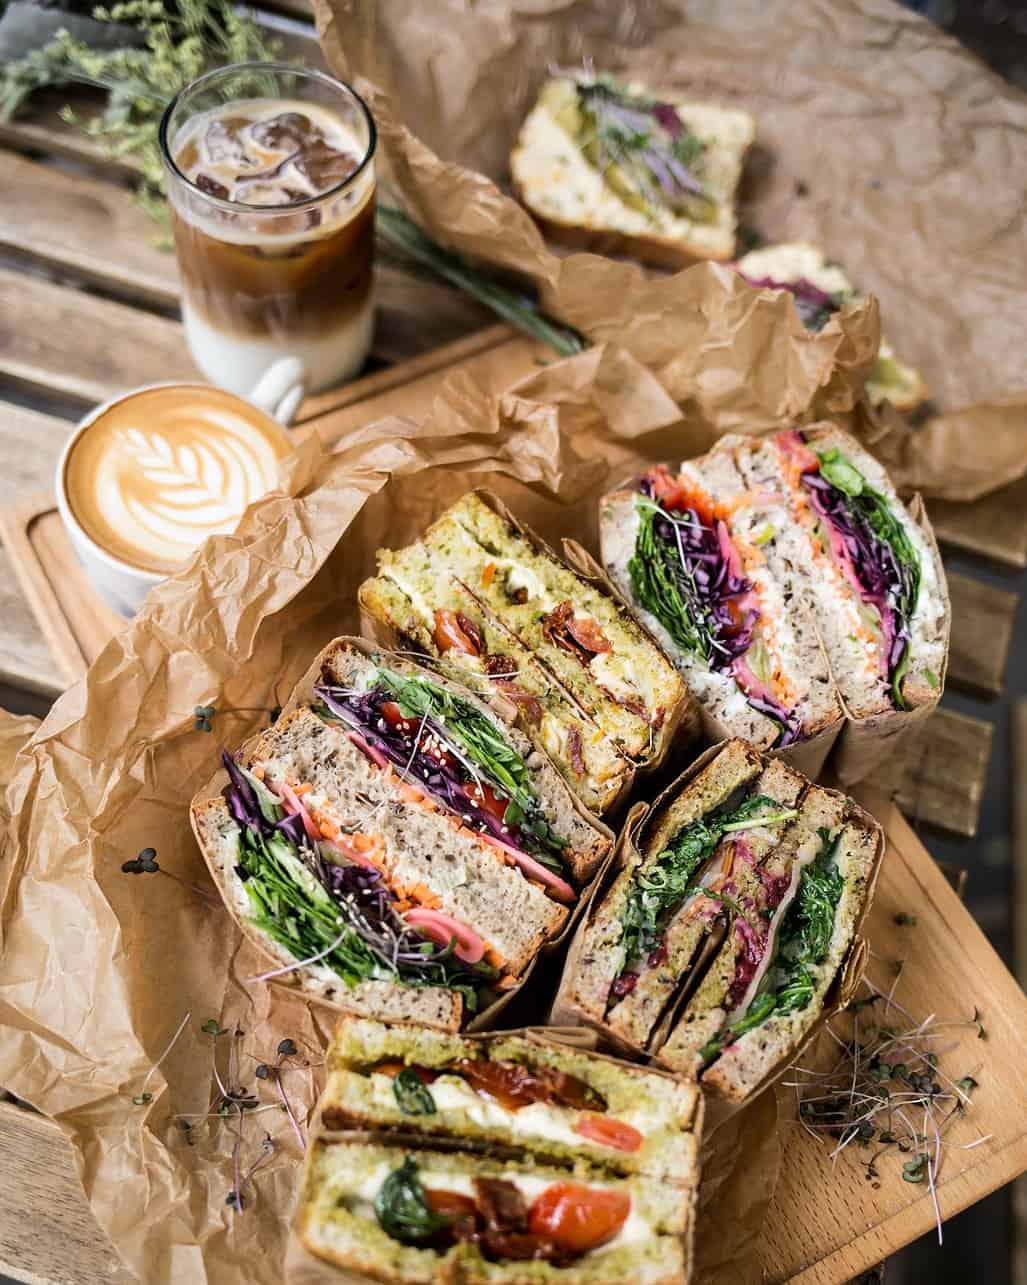 Sandwiches and coffee at Mamacoffee in Prague, Czech Republic.